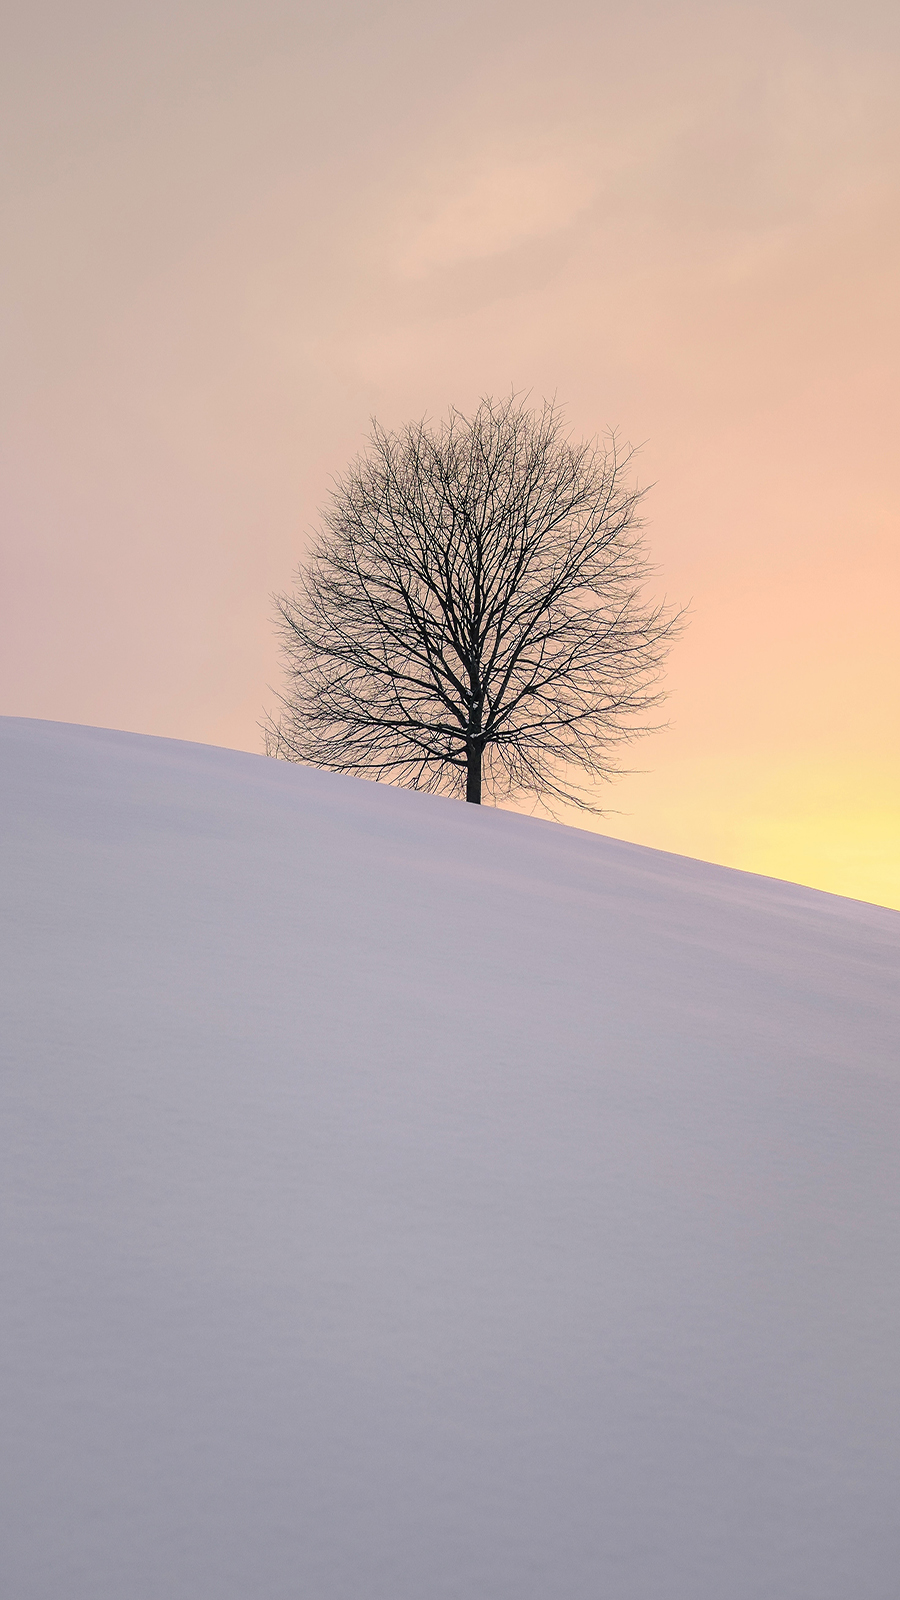 Snow Wallpapers Free Download – Best Winter Wallpapers for Mobile (12)